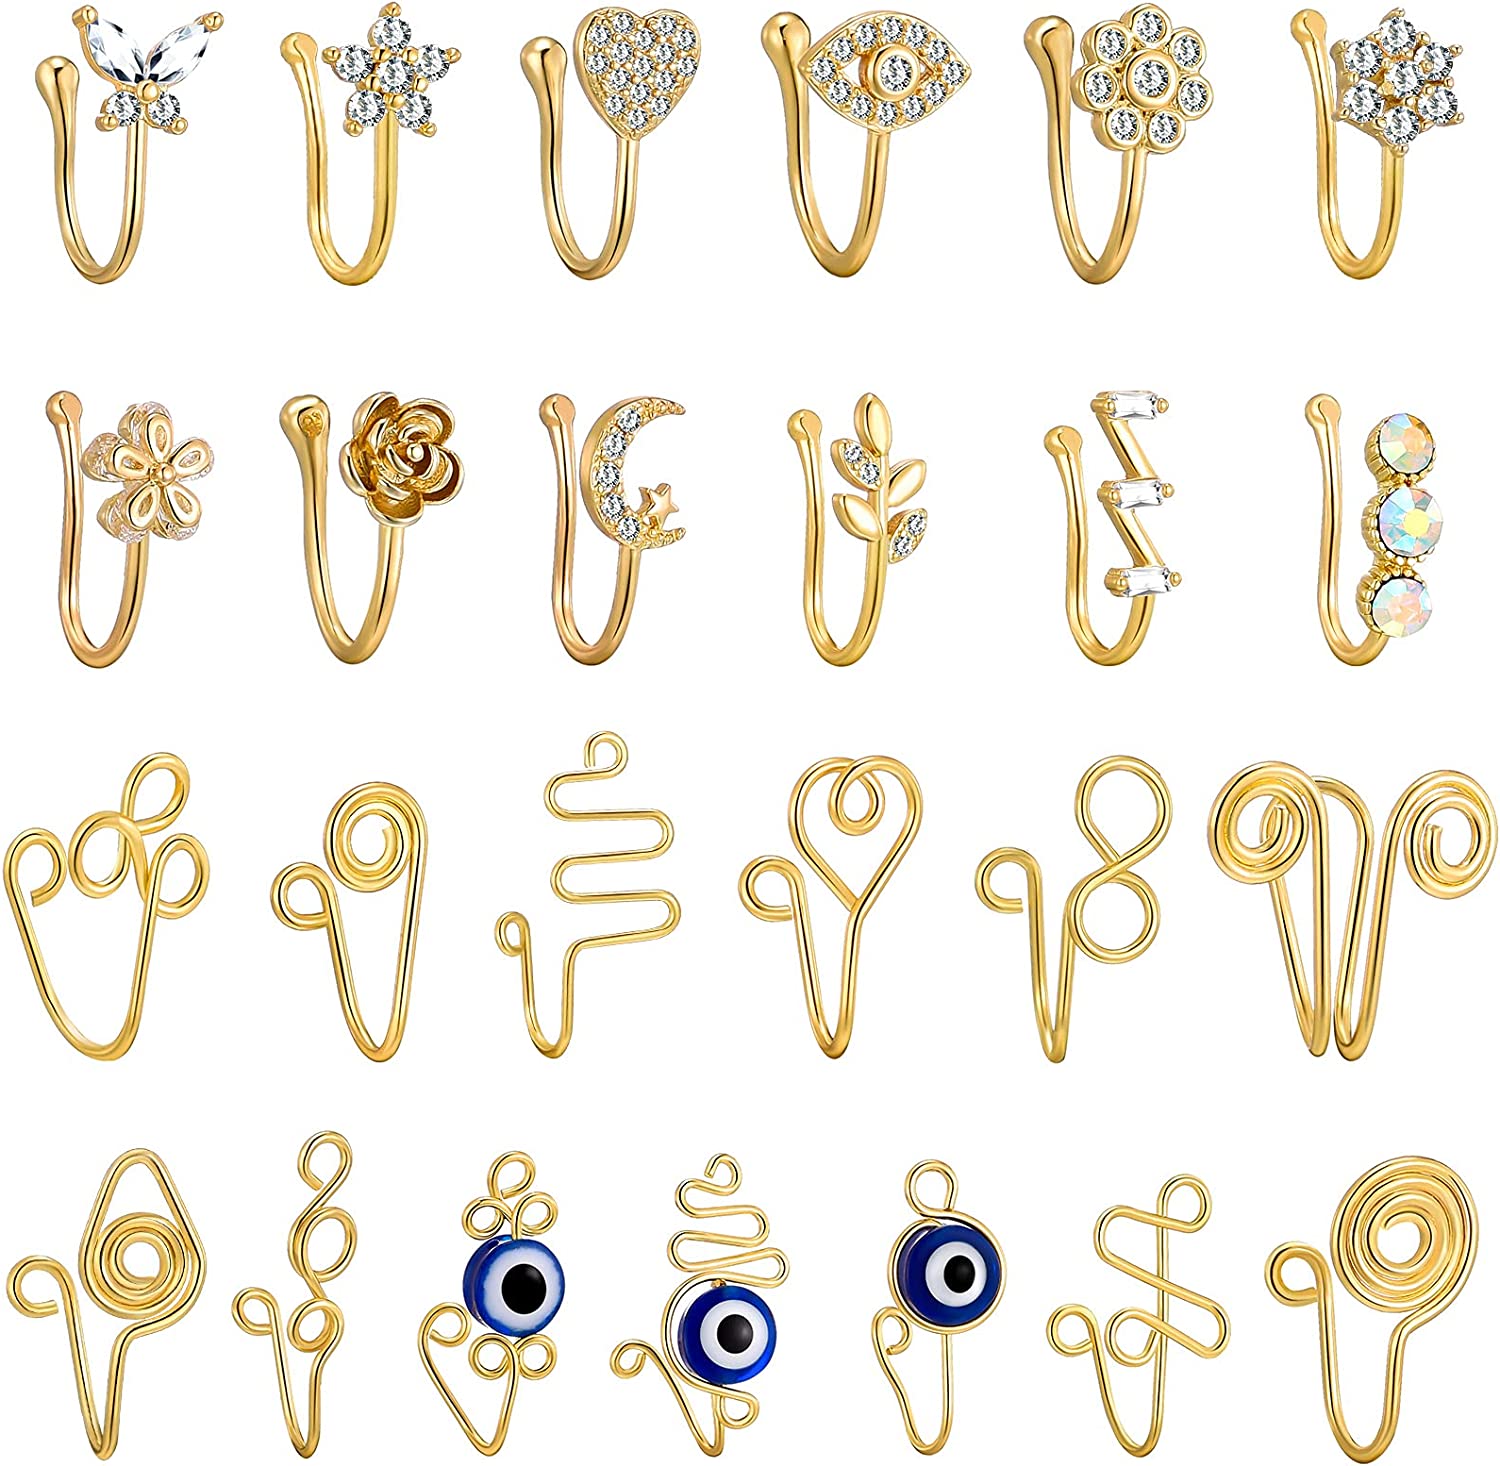 TAMHOO 25 Pcs Multi-Style Fake Nose Rings for Women and Men -Gold Plated Copper African Nose Cuff Non Piercing for Teen Grirls - Nice Gift for Her on Birthday/Valentines Day/Christmas